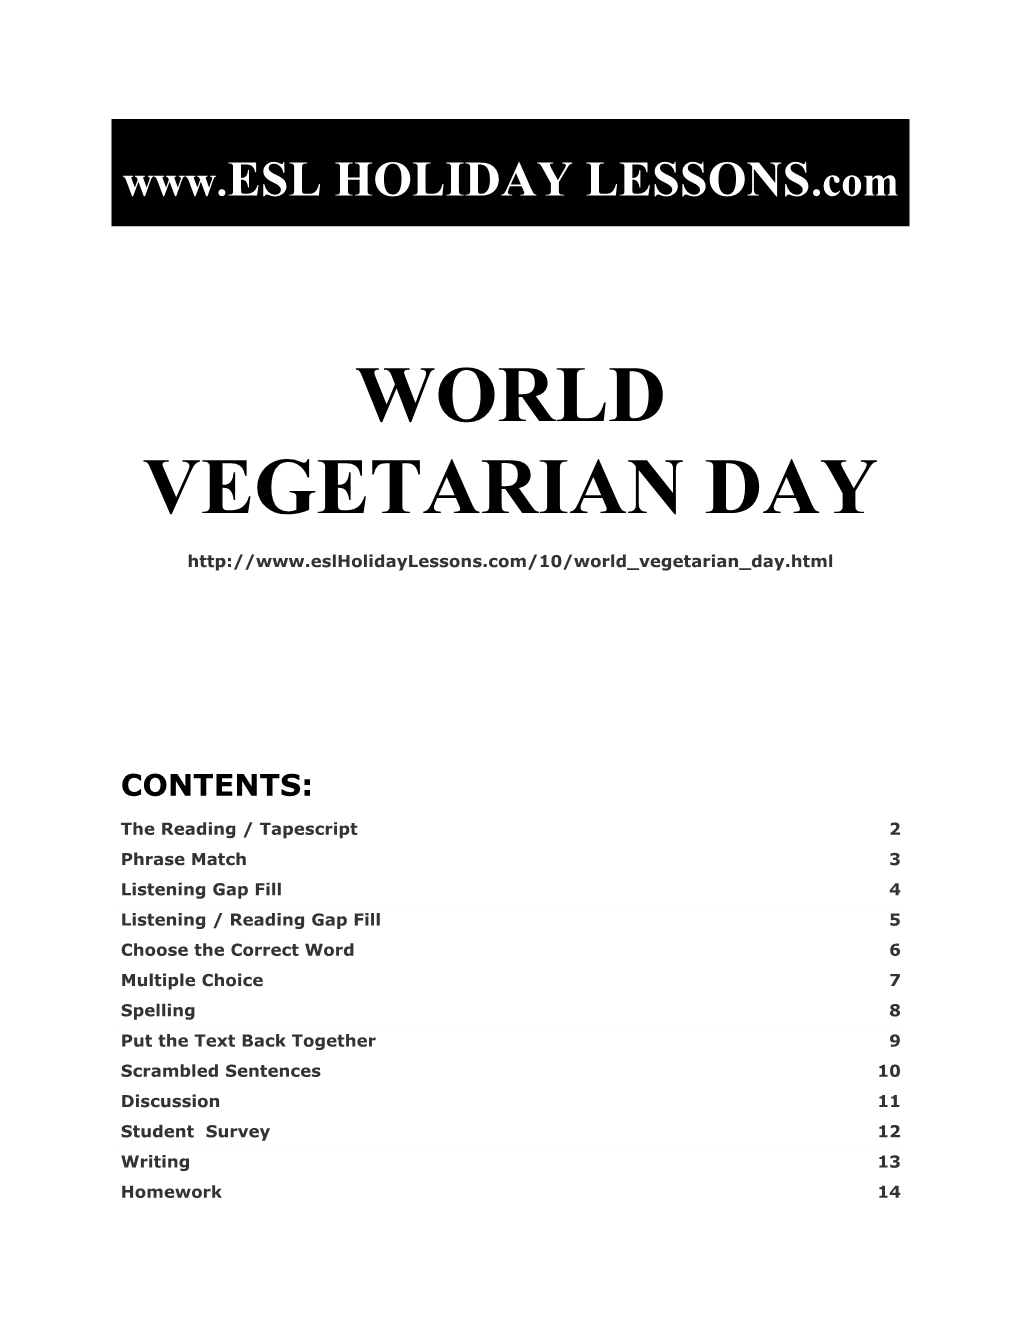 Holiday Lessons - World Vegetarian Day